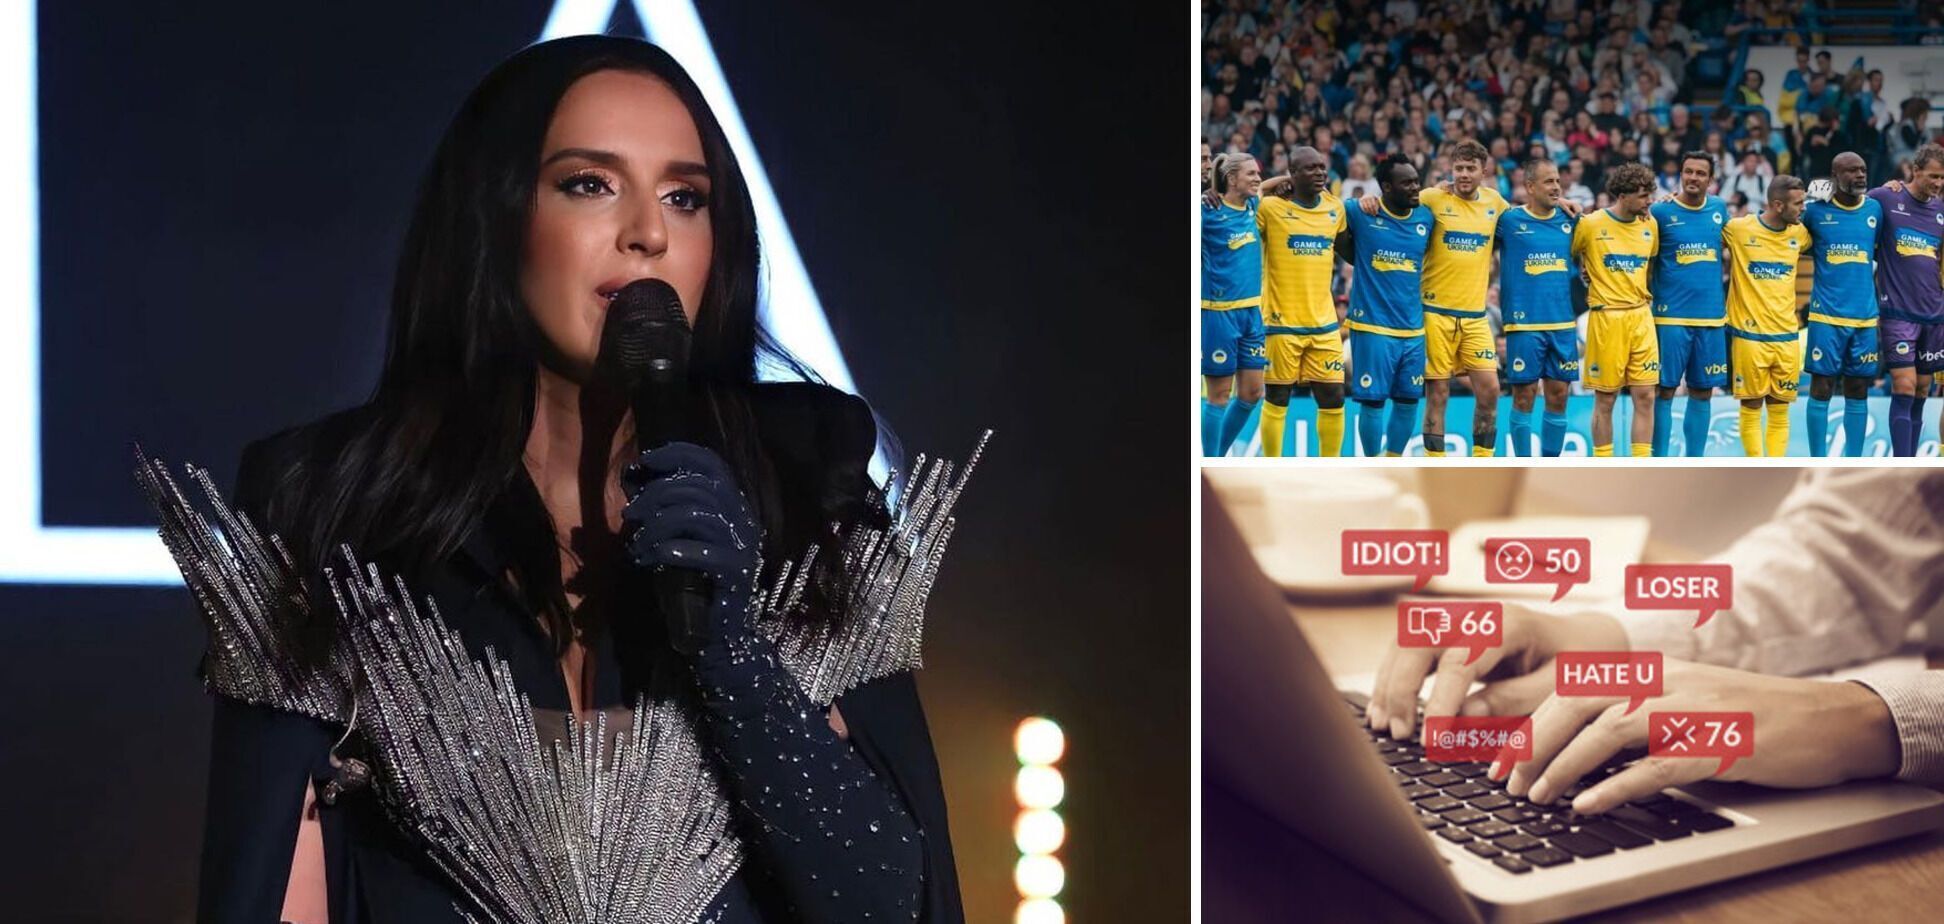 The stadium in Poland fantastically performed the anthem of Ukraine before the match with England. Video